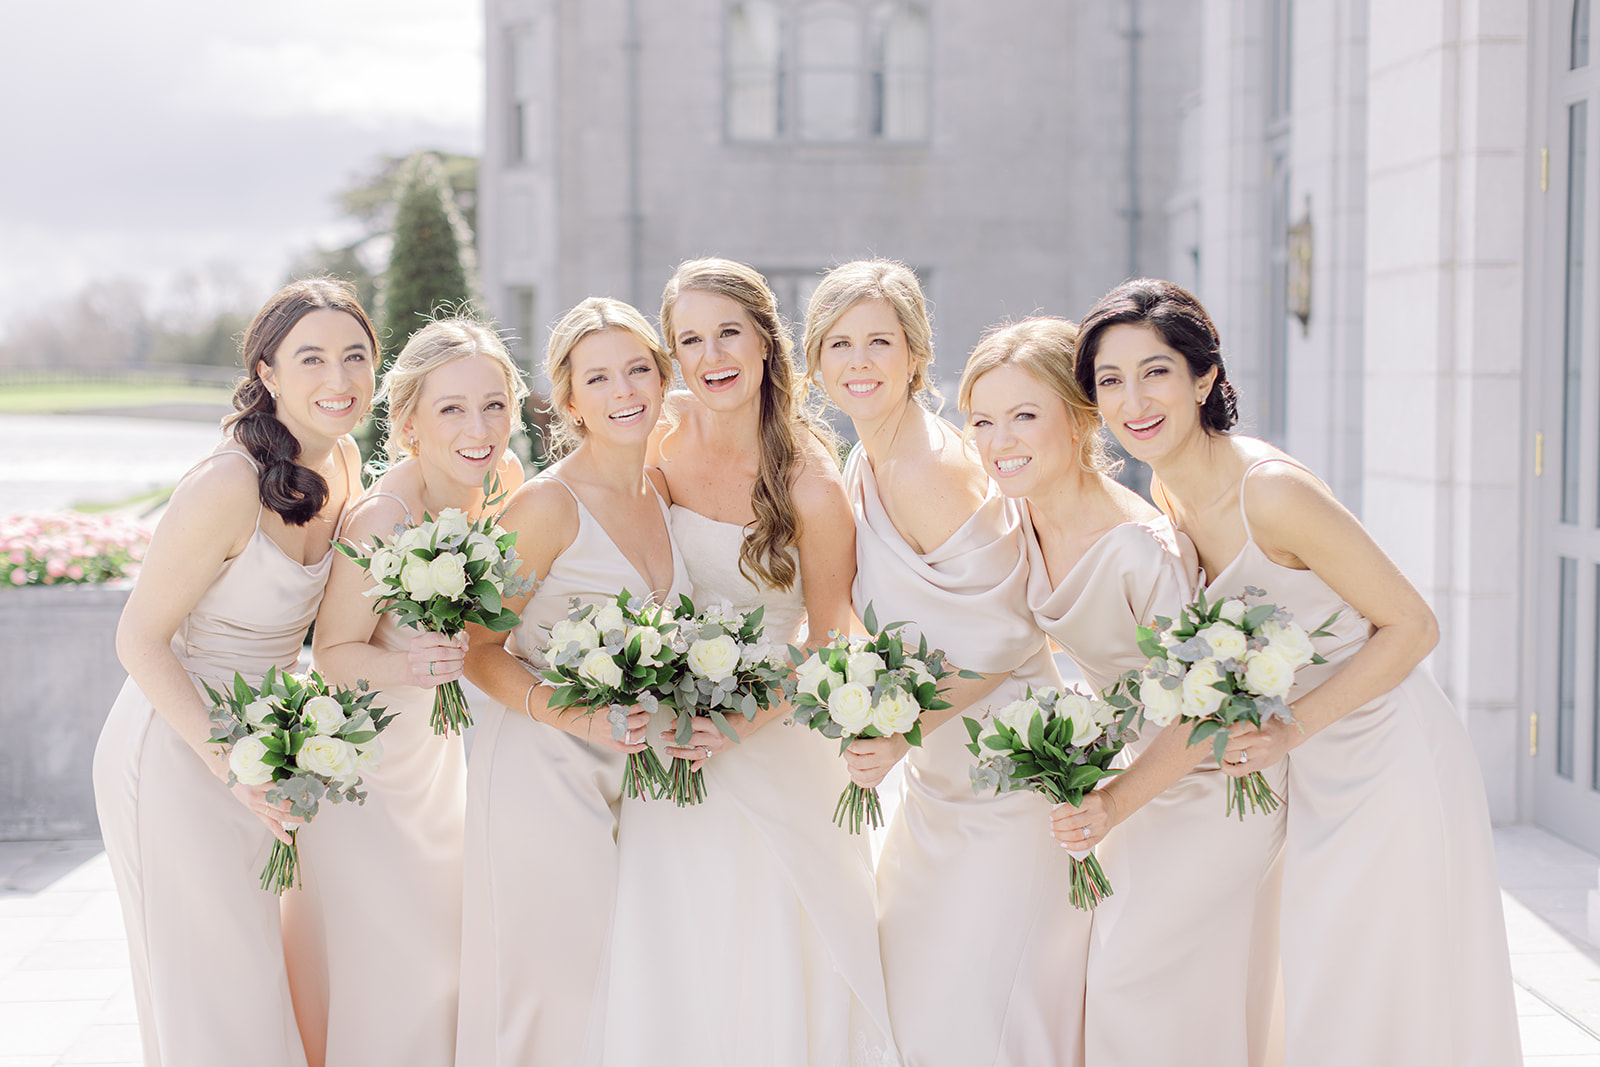 Bridesmaids and bridal party tips: What I wish I knew before planning my  wedding